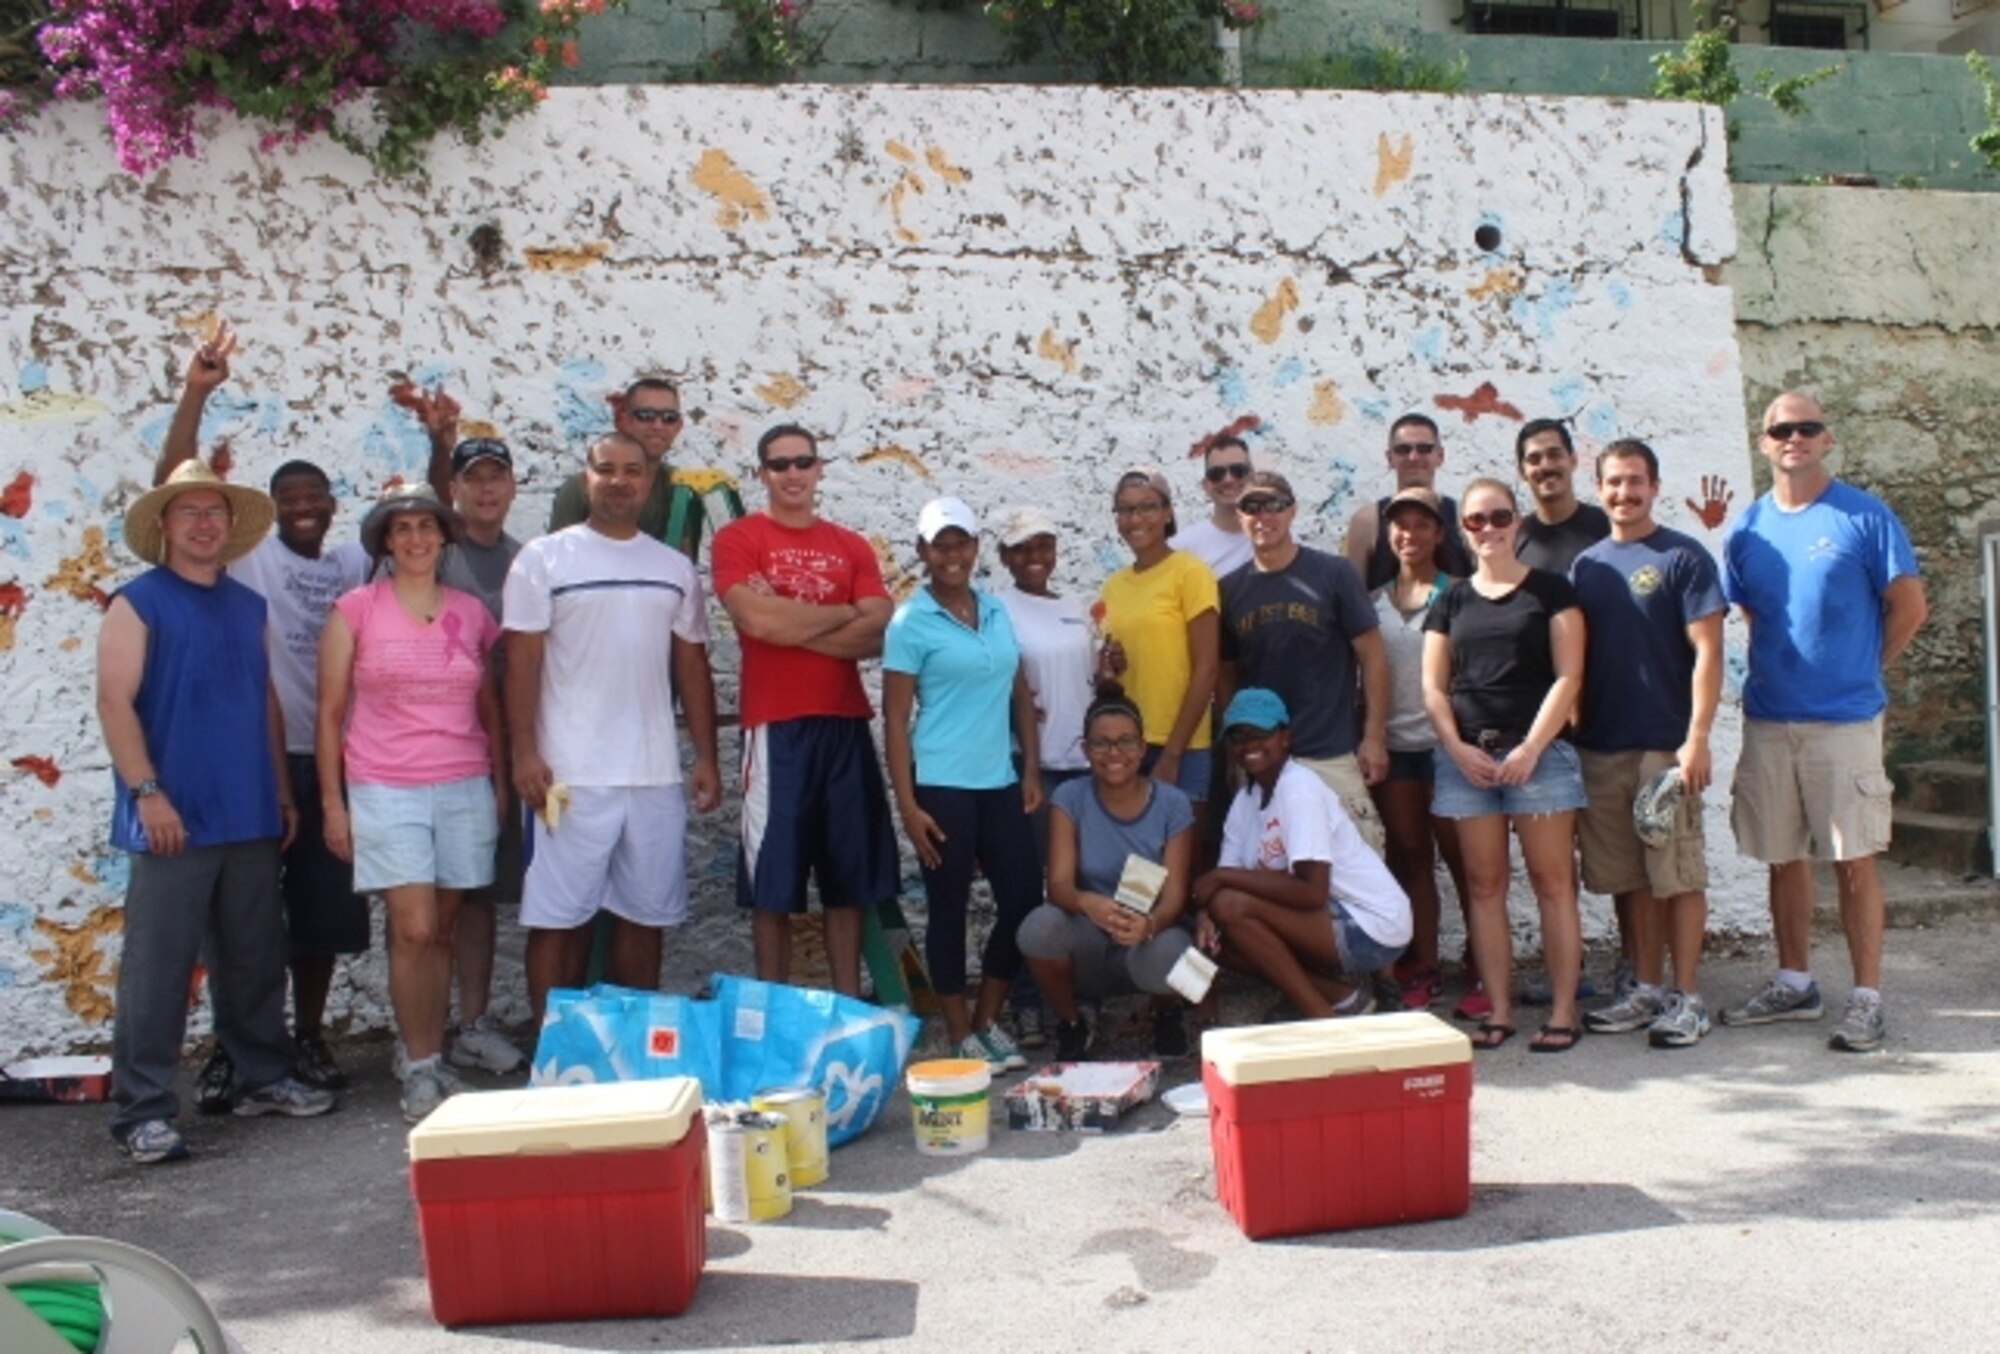 Fifteen Airmen from the U.S. Forward Operating Location pause for a photo while revitalizing the Kas Broeder Pius Women’s and Children’s Shelter, Oct. 25, 2014. The Airmen partnered with six local high school students and their families to paint the compound walls and clear debris in order to enhance the living space for residents. Kas Broeder Pius provides a safe living environment for teenage women who are pregnant or have small children. Members of the USFOL look for volunteer opportunities to demonstrate their long standing appreciation for the hospitality they receive from the citizens of Curacao. (Courtesy Photo)